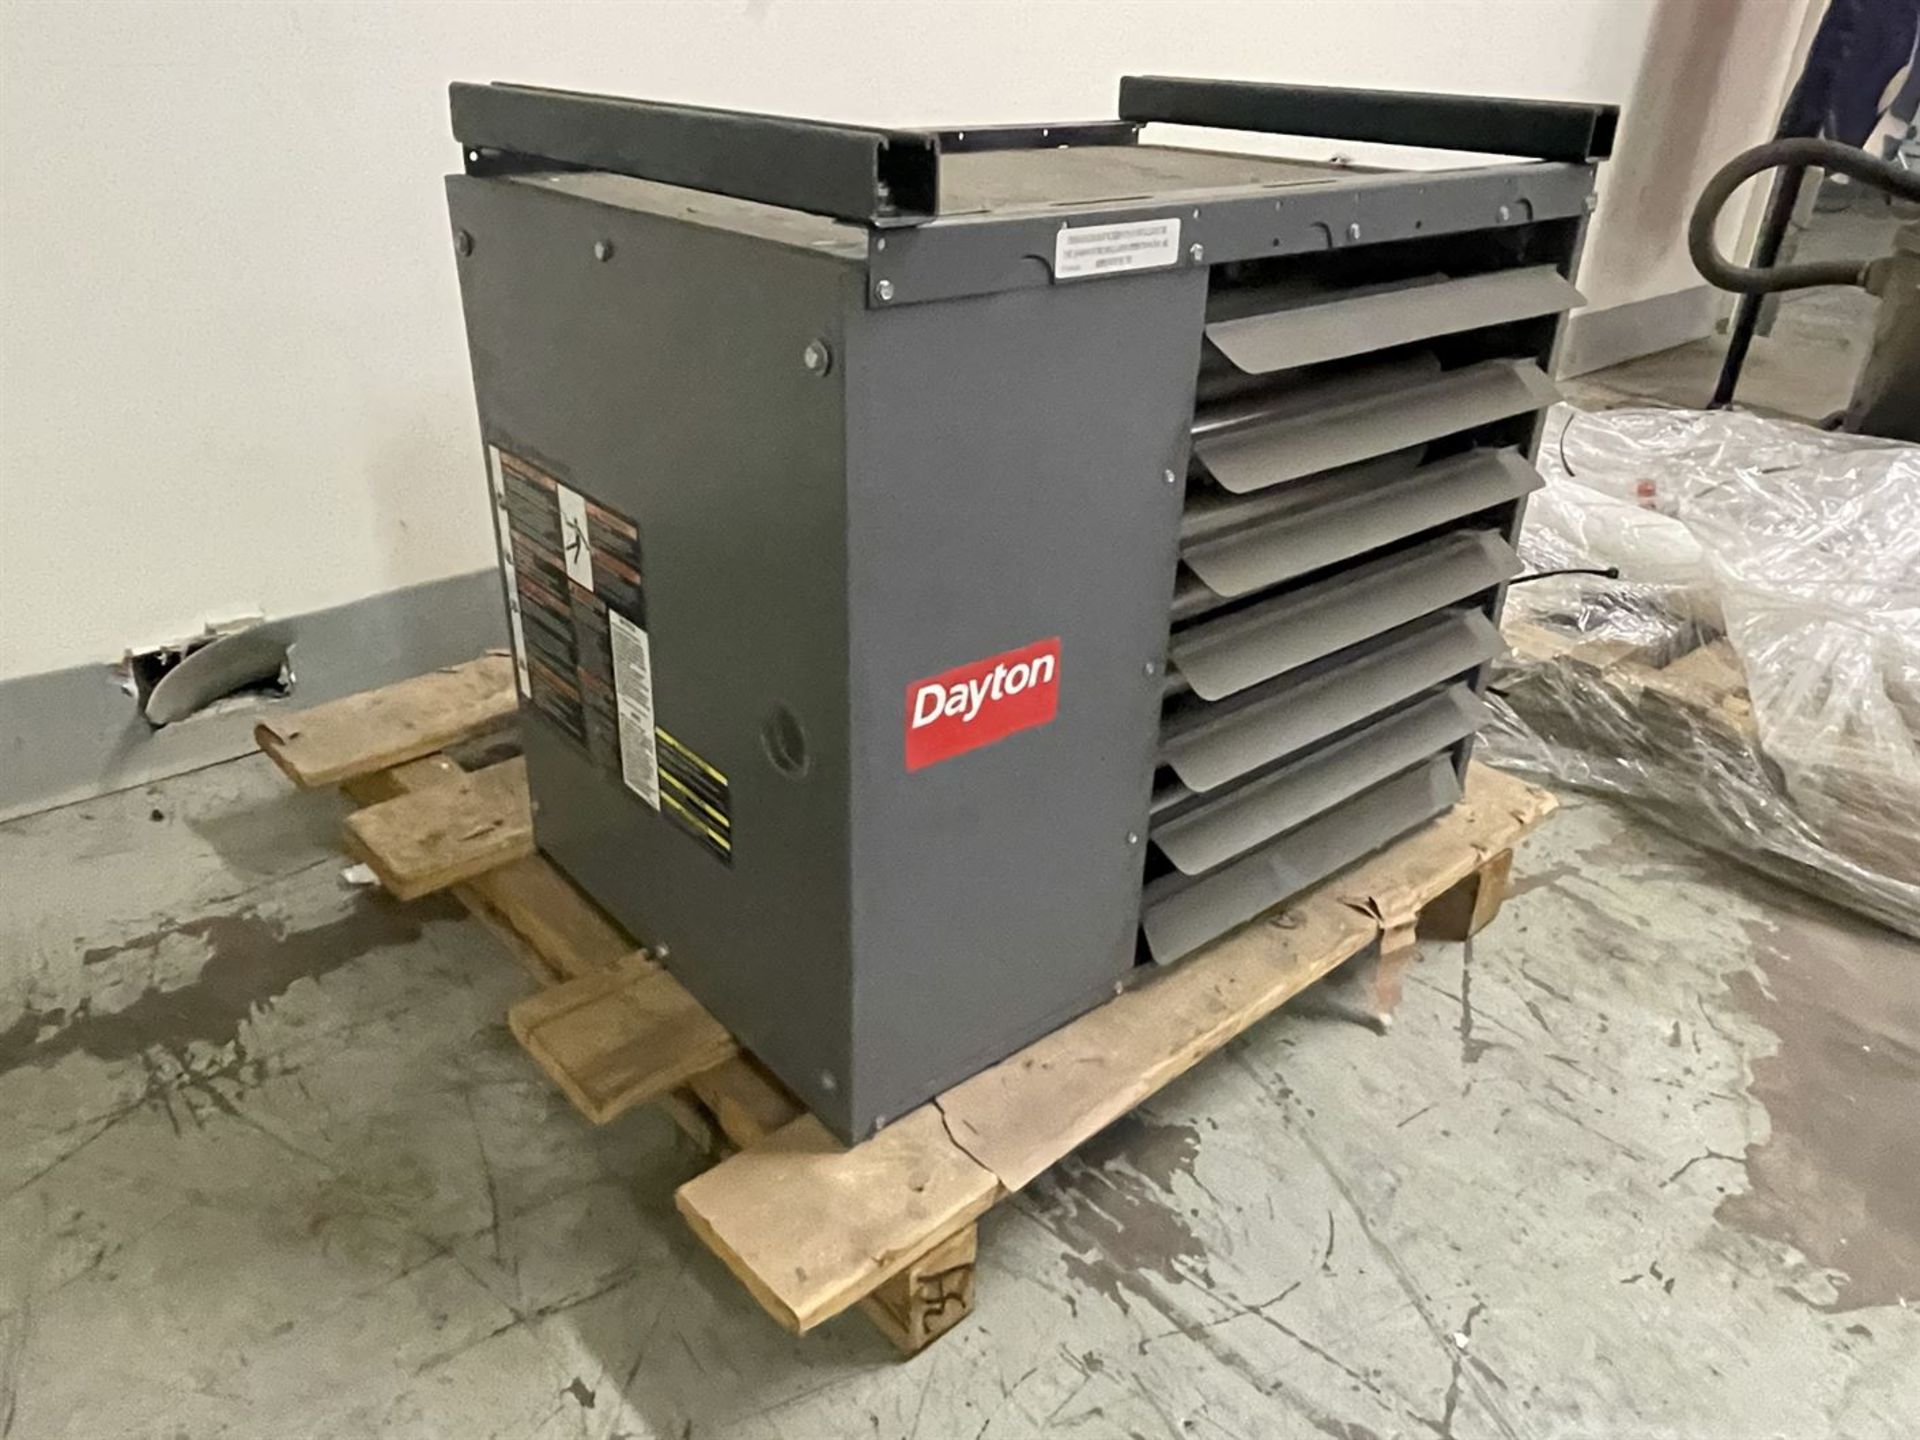 Dayton Commerical Heater, (Item located at 2375 Touhy Ave, Elk Grove Village, IL 600047) - Image 2 of 3